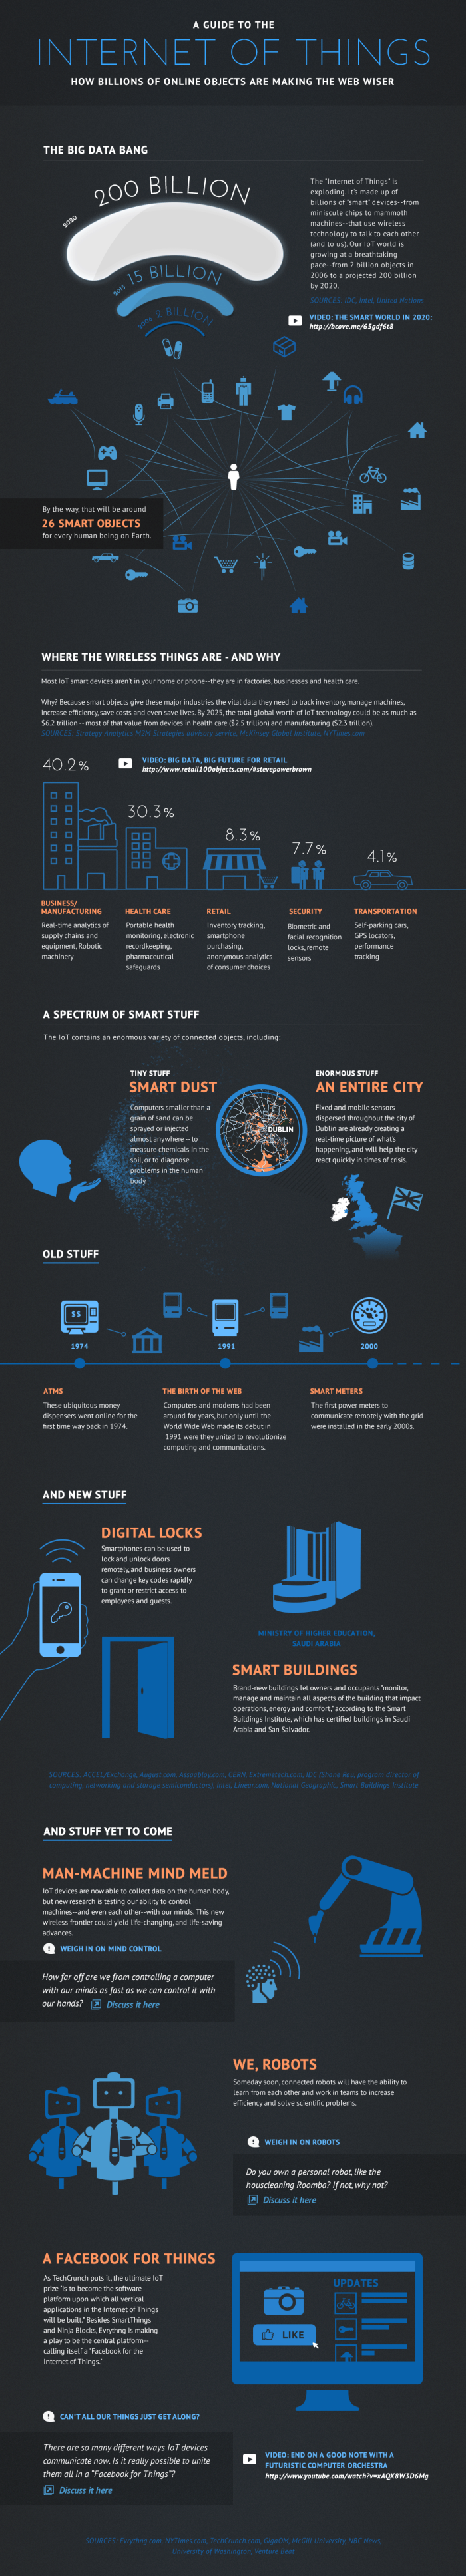 bds_20141120194022_How-The-Internet-of-Things-Will-Make-Our-World-Smart-Infographic